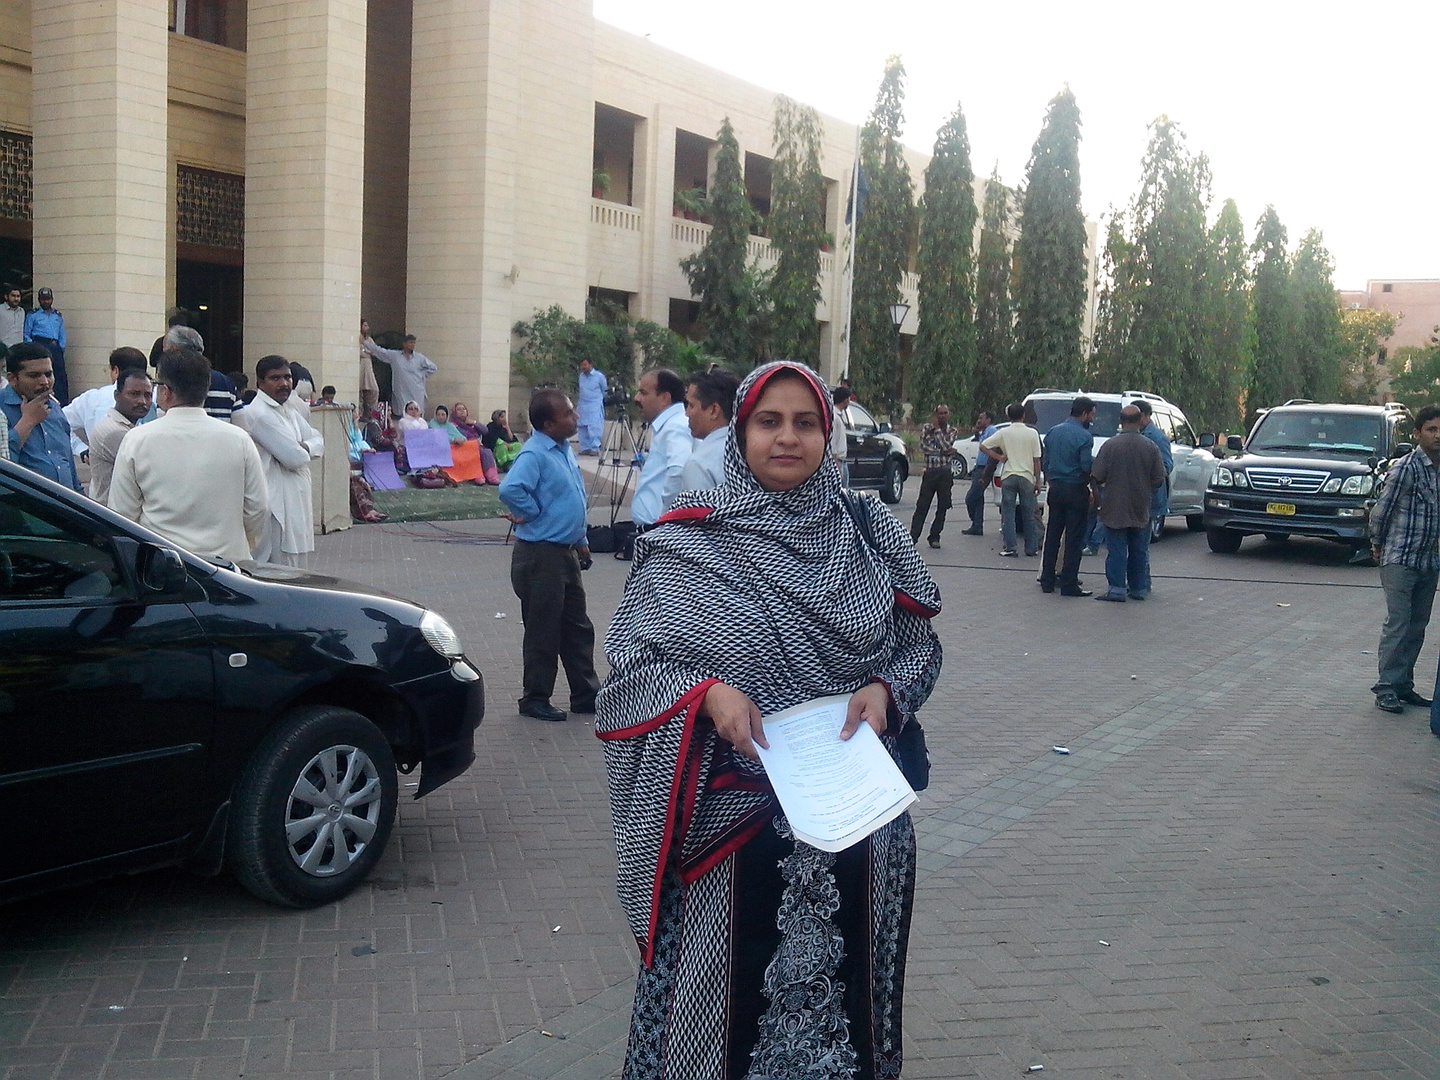 Nutrition International staff member Fatima Saad standing in front of a building in Pakistan